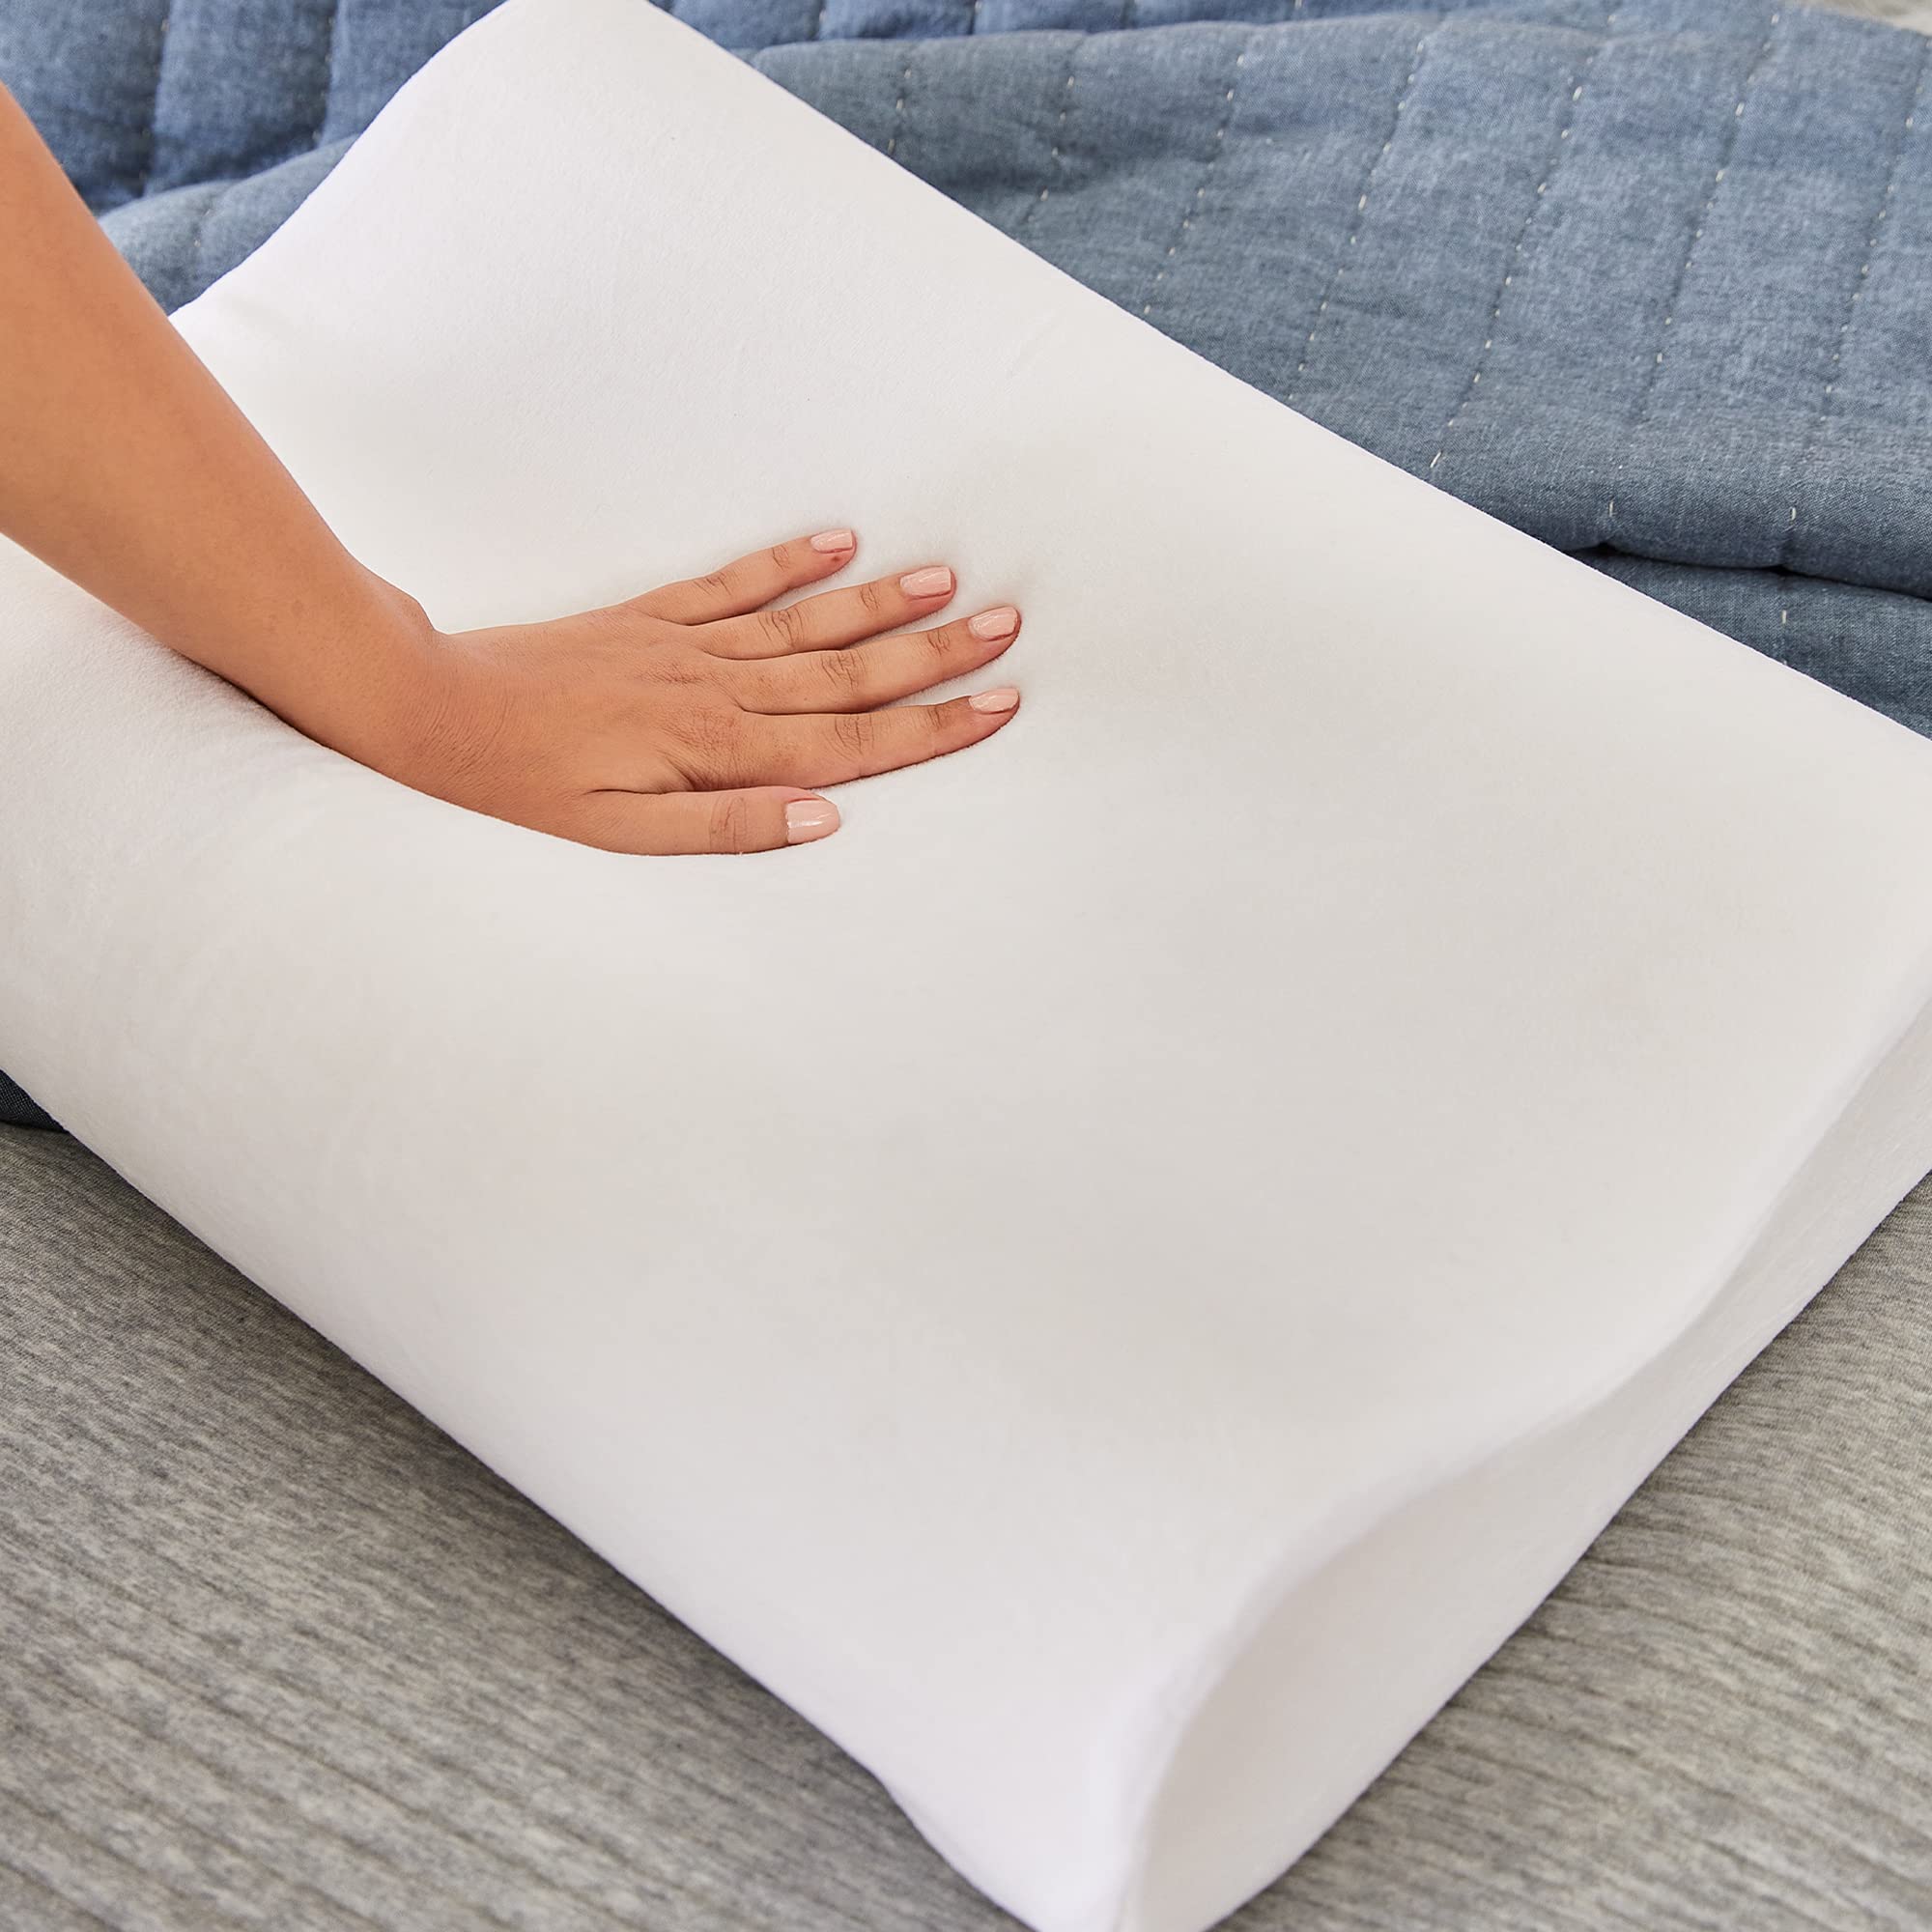 Sleep Innovations Memory Foam Contour Pillow, Queen Size, Head, Neck, and Shoulder Alignment, Side and Back Sleepers, Medium Support & PL12500BPMS Pillow, 1'8